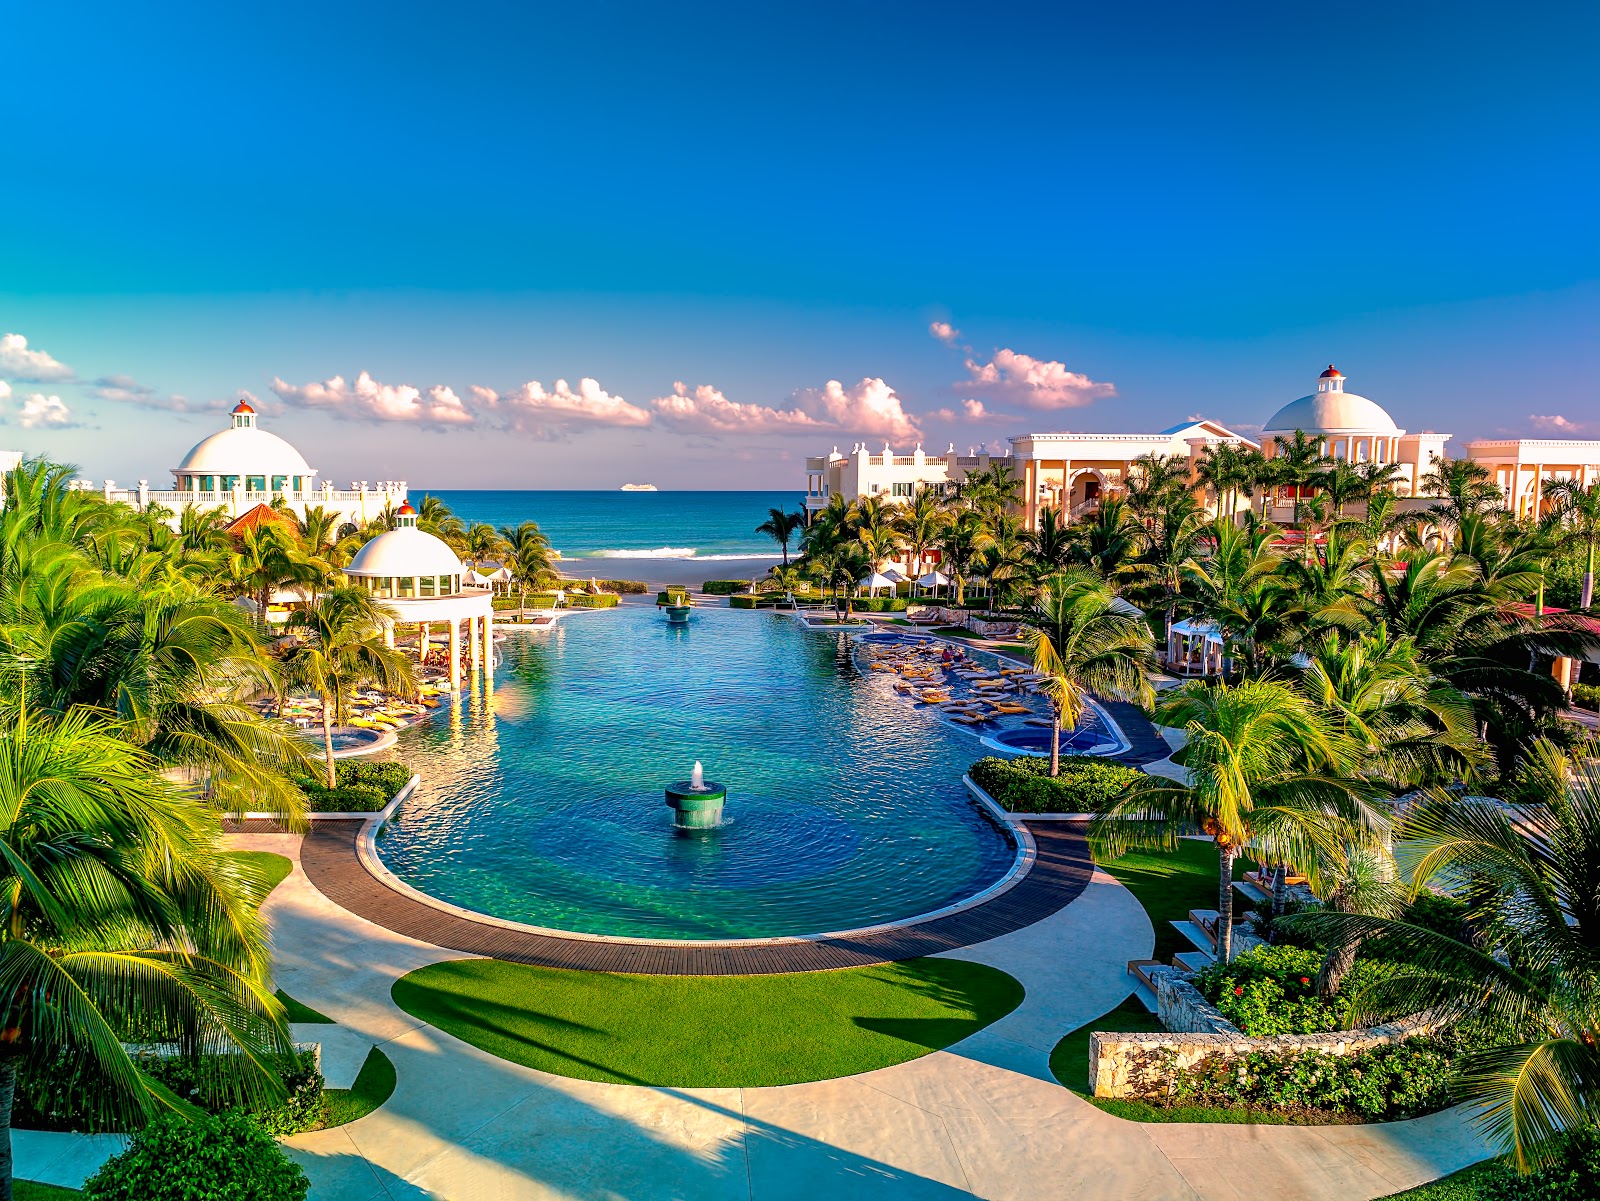 A Life In The Day Of: Riviera Maya Resort